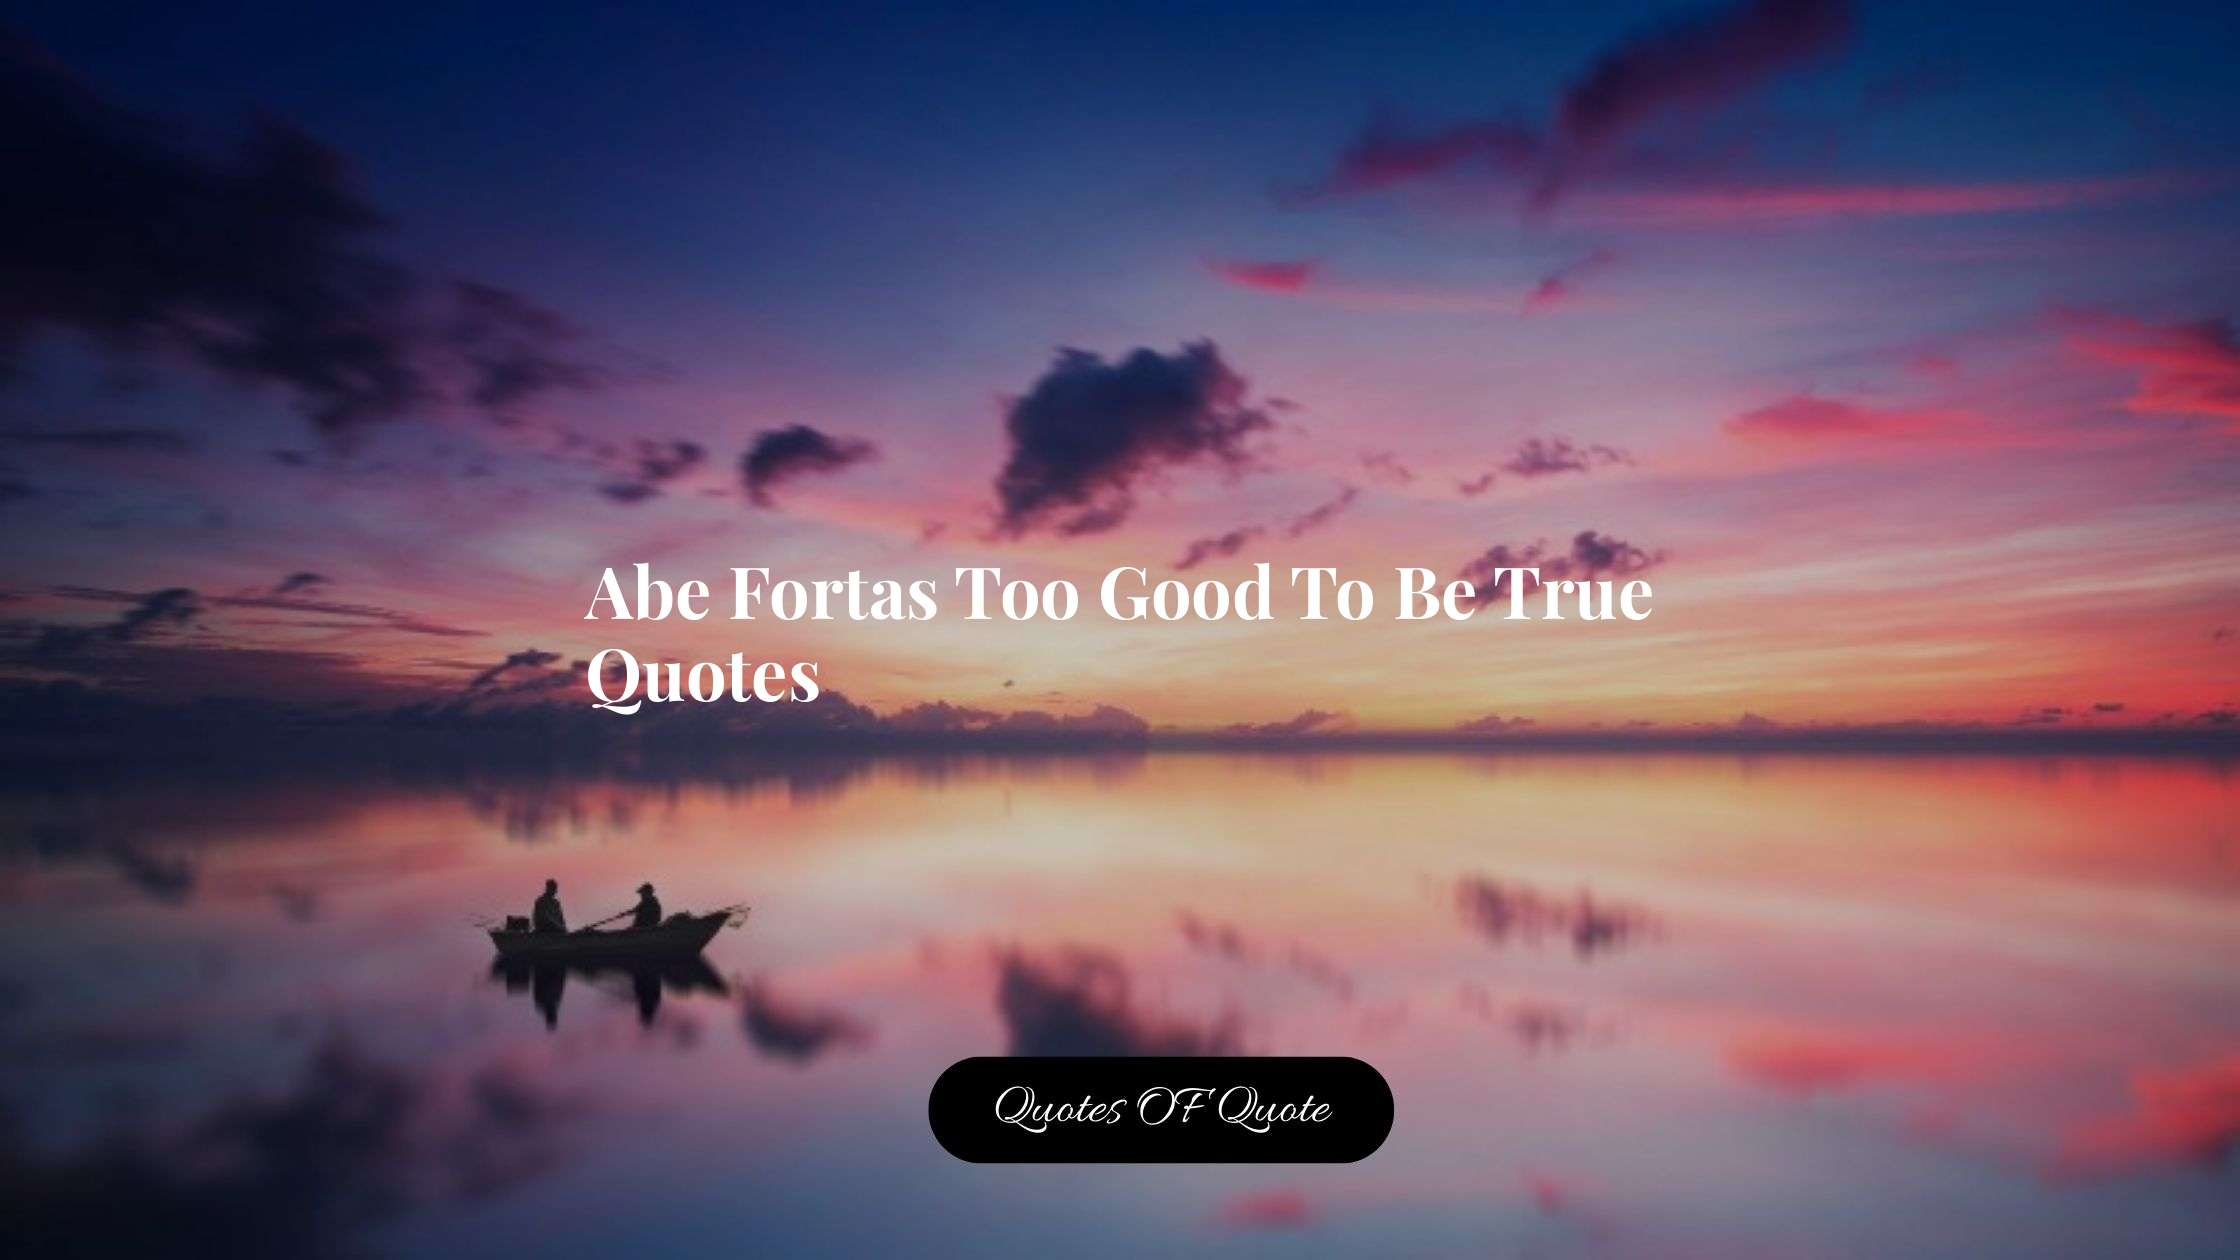 Abe Fortas Too Good To Be True Quotes